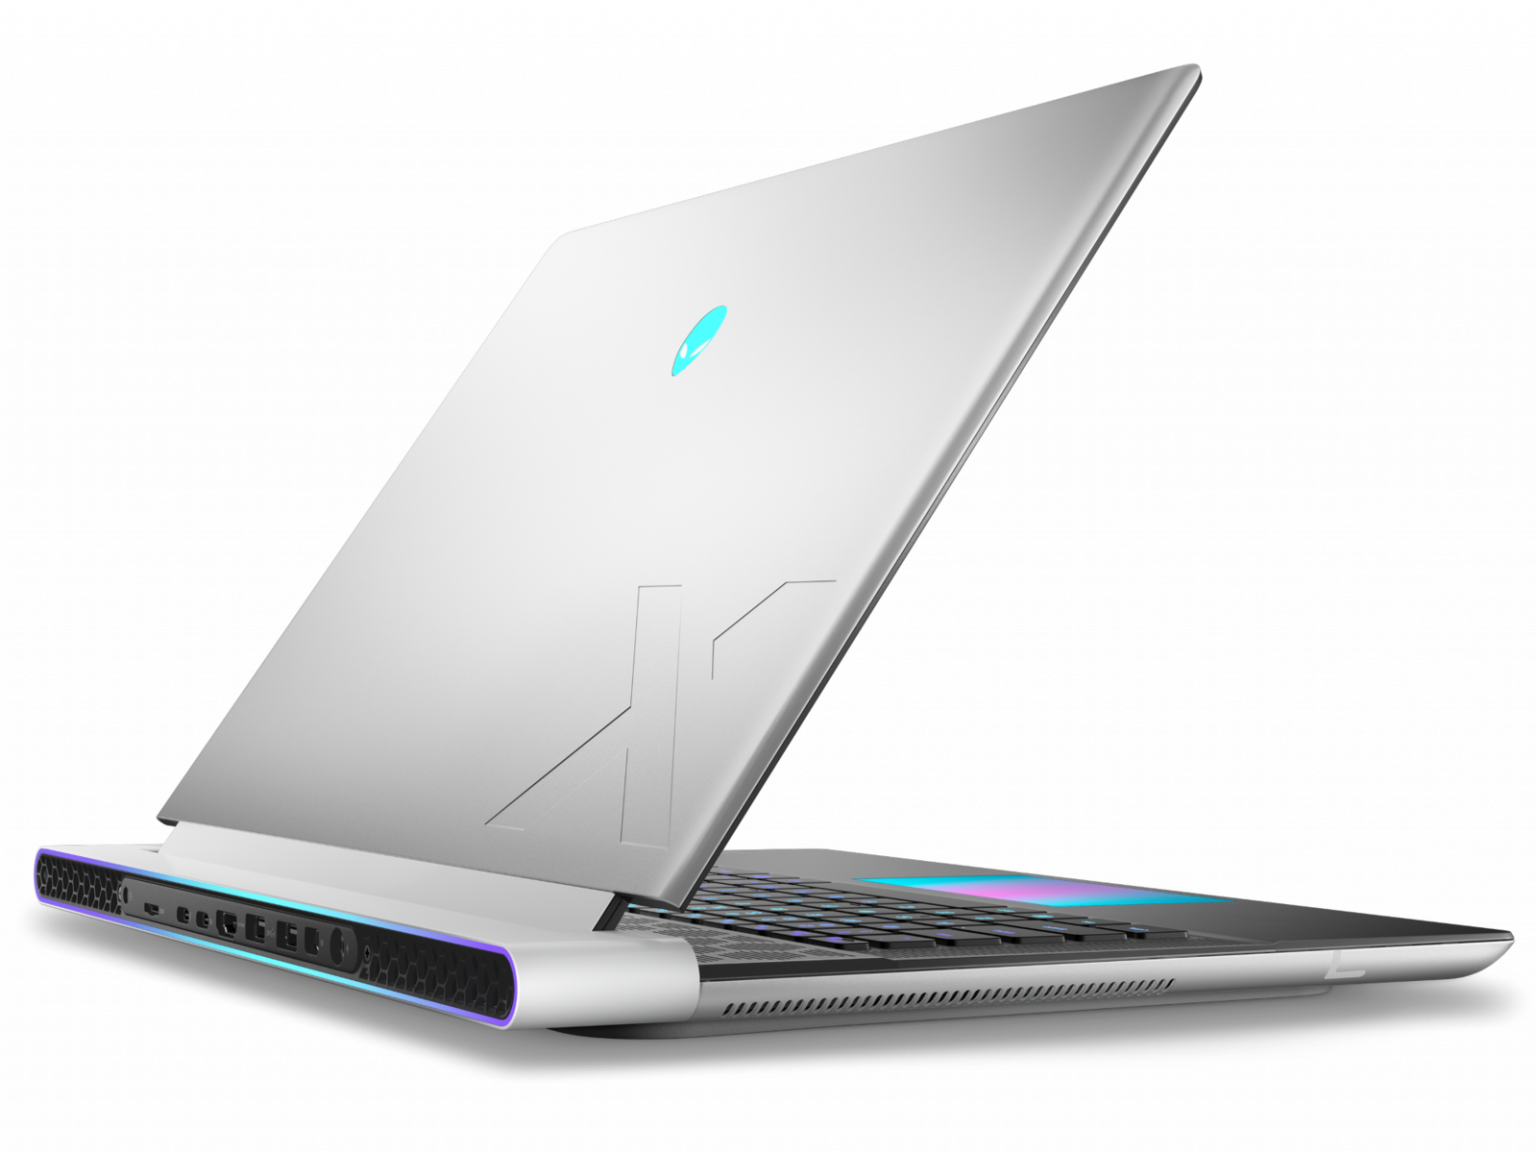 Alienware x16 introduced as world's most premium gaming laptop with up